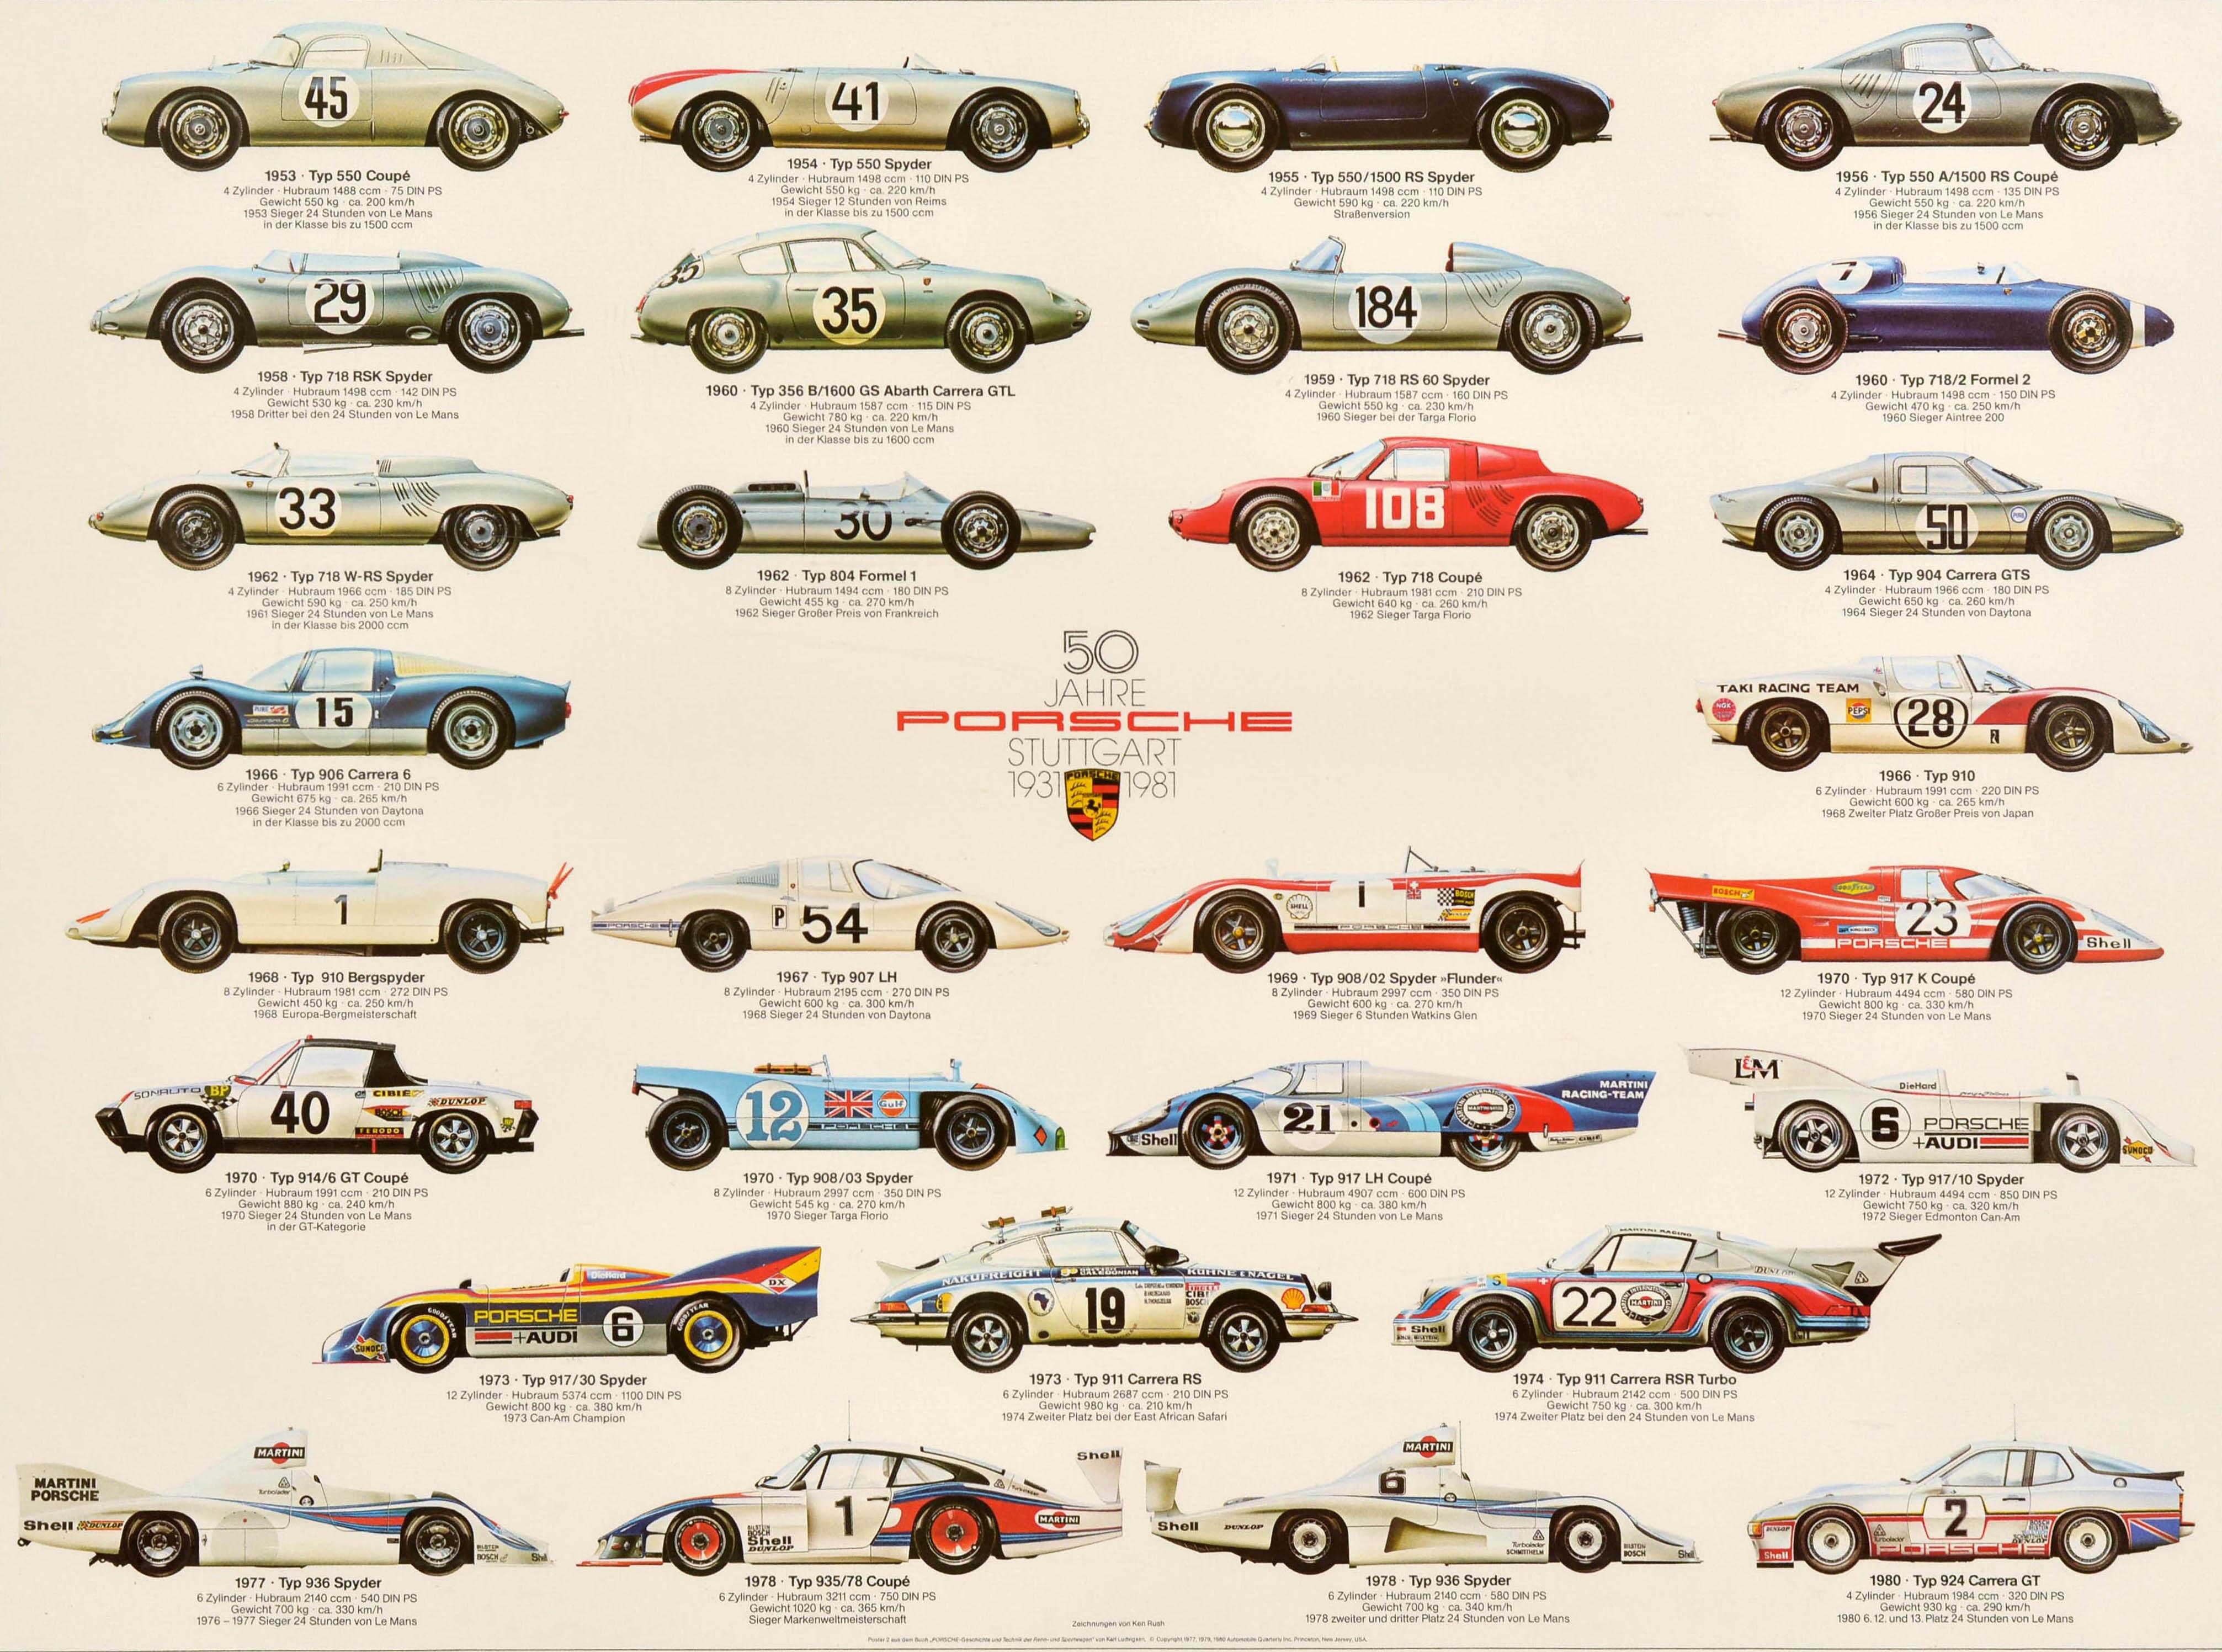 Original vintage commemorative poster for the 50th anniversary of the German car manufacturer Porsche (1931-1981) featuring a colourful and informative design by Ken Rush showing 29 models of Porsche racing cars produced between 1953 and 1980 with